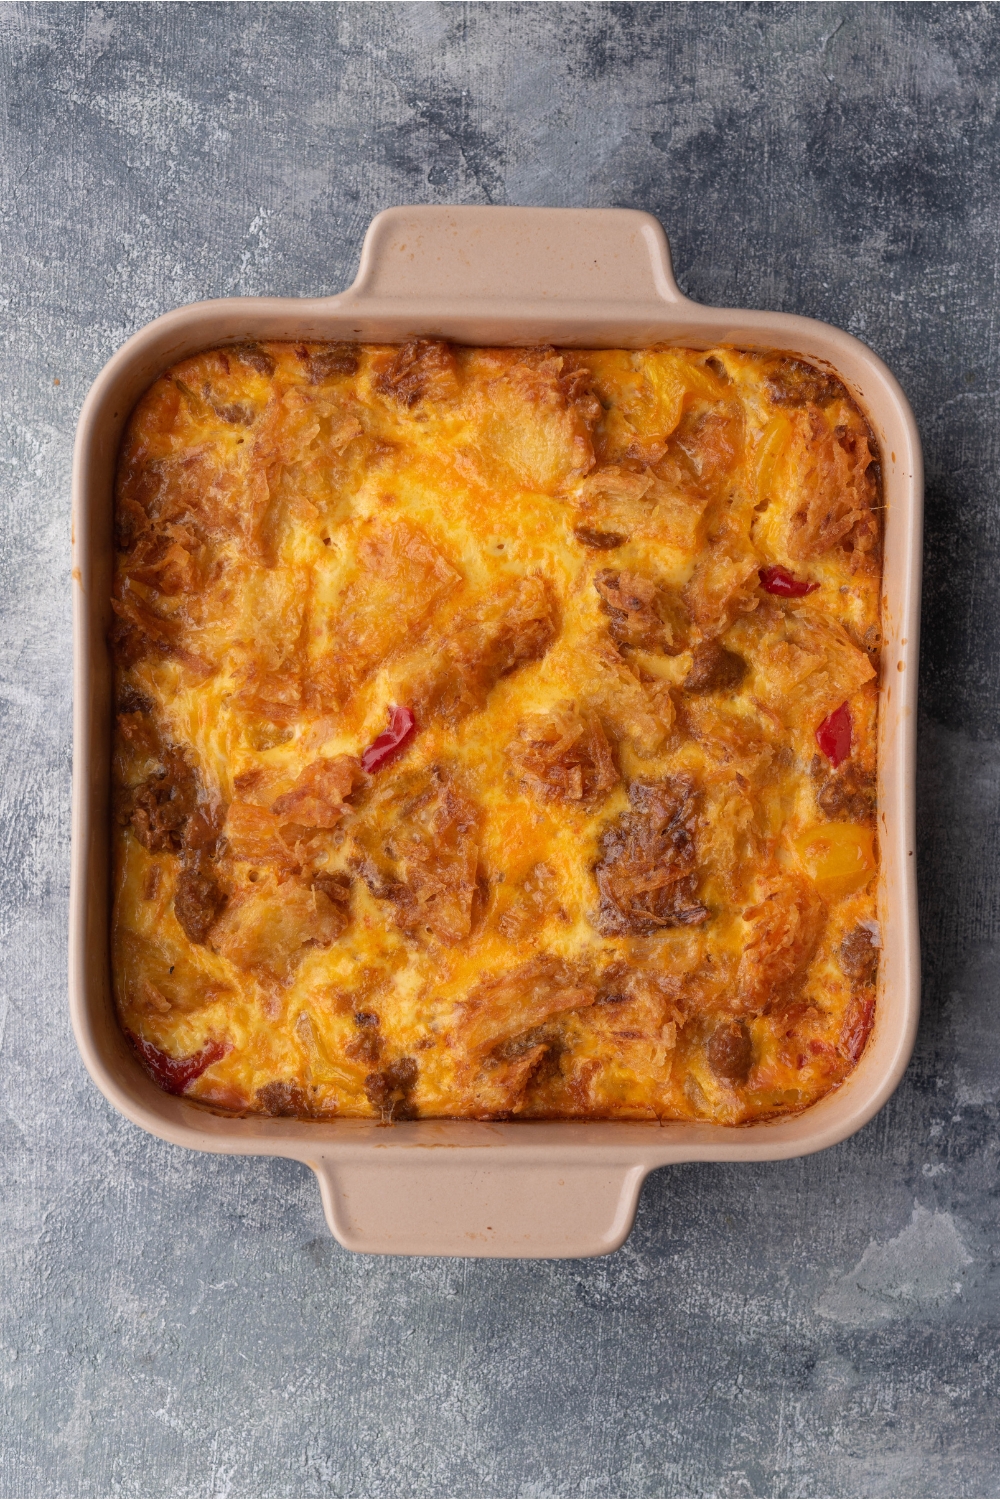 A brown casserole dish with baked sausage casserole.